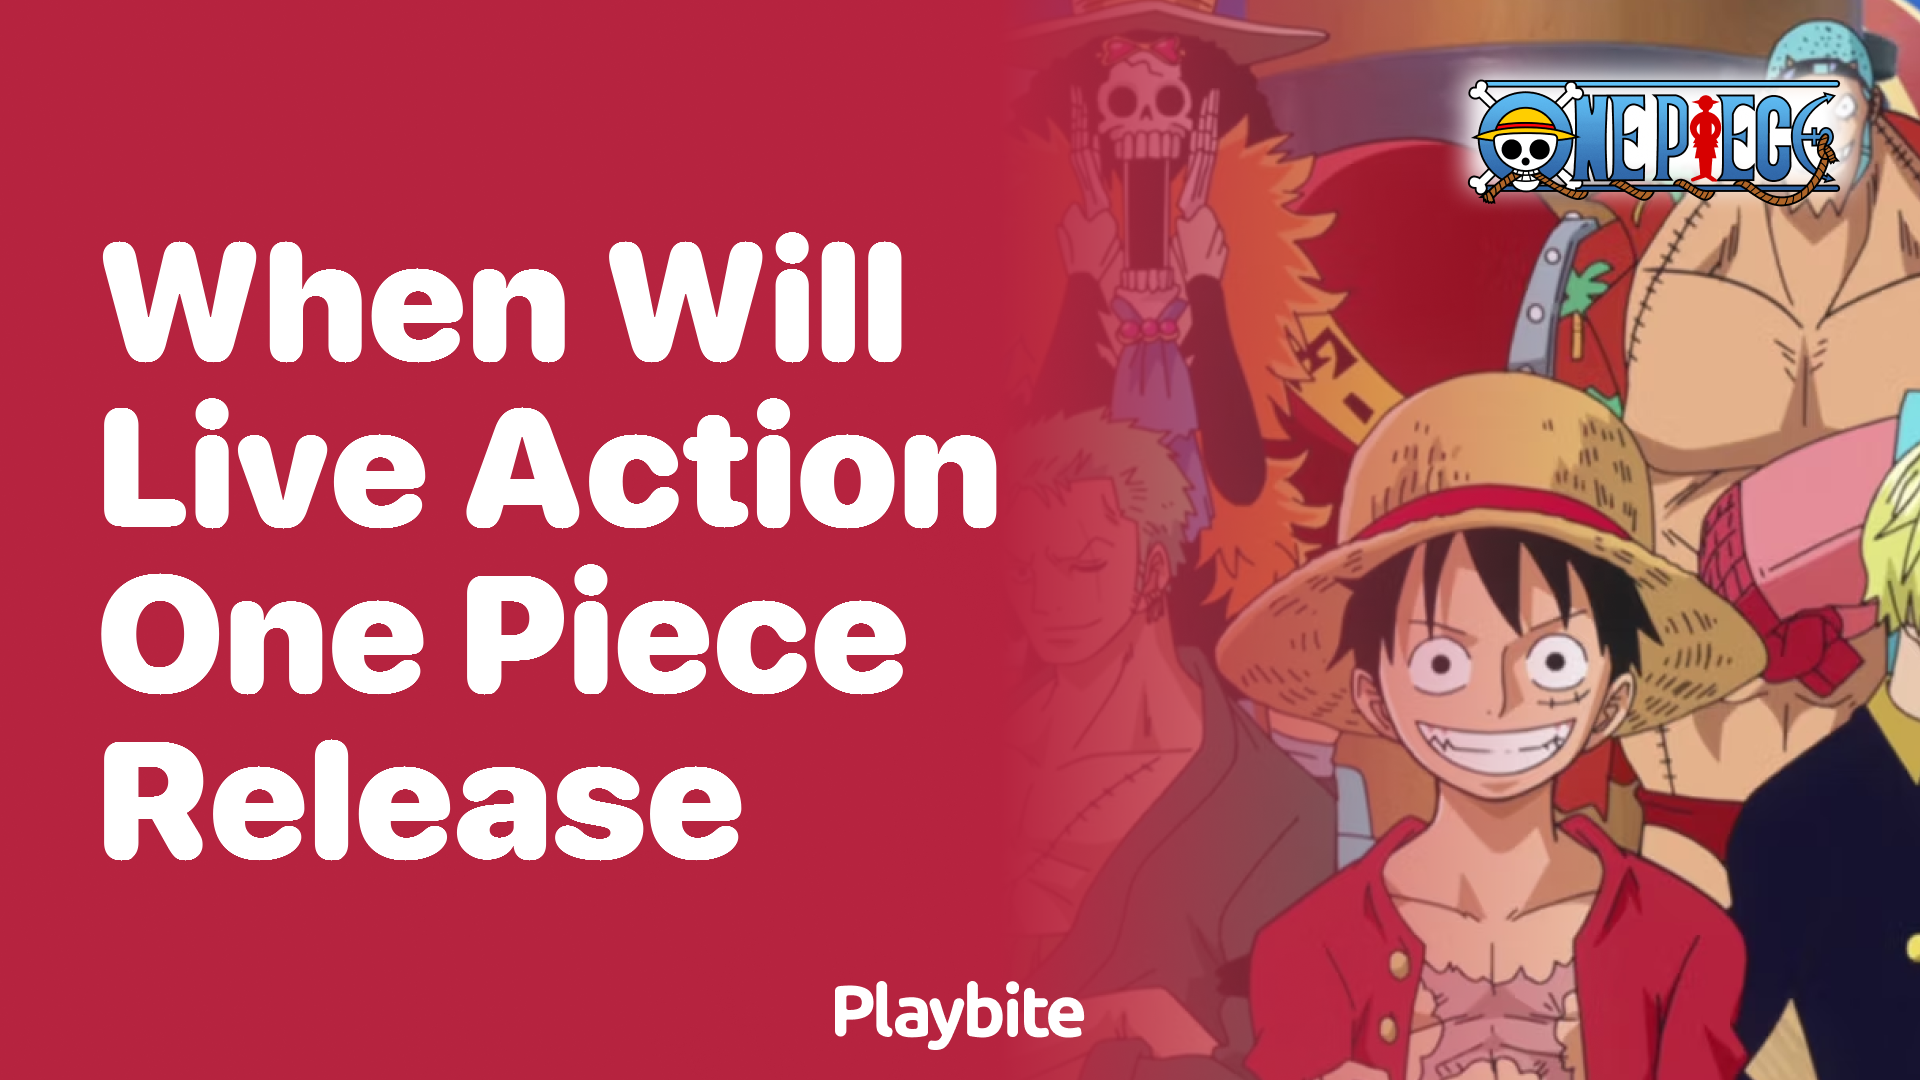 When will the live-action One Piece release?